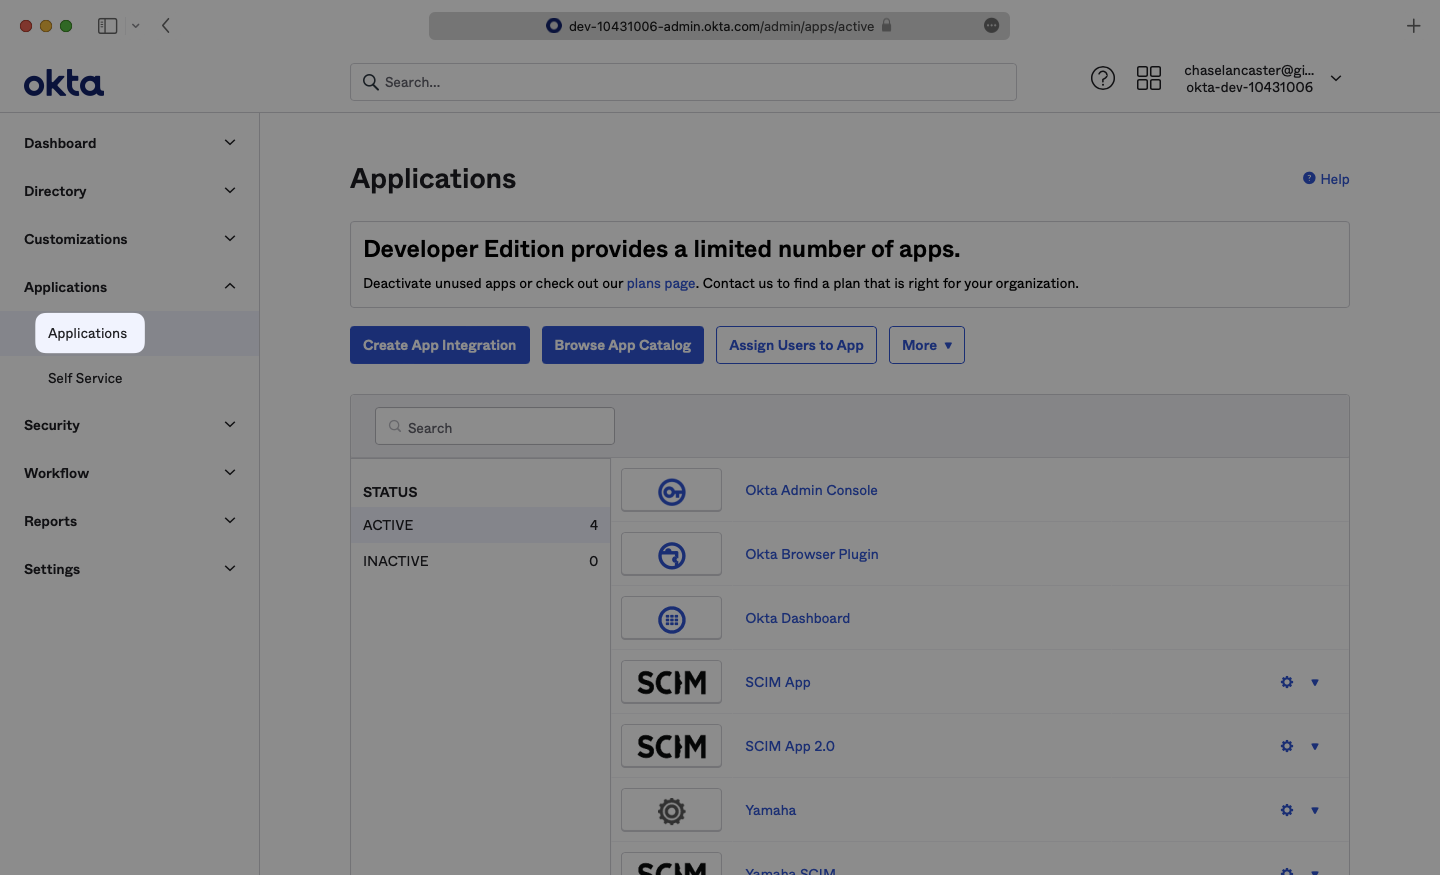 A screenshot showing where to select "Applications" in Okta.